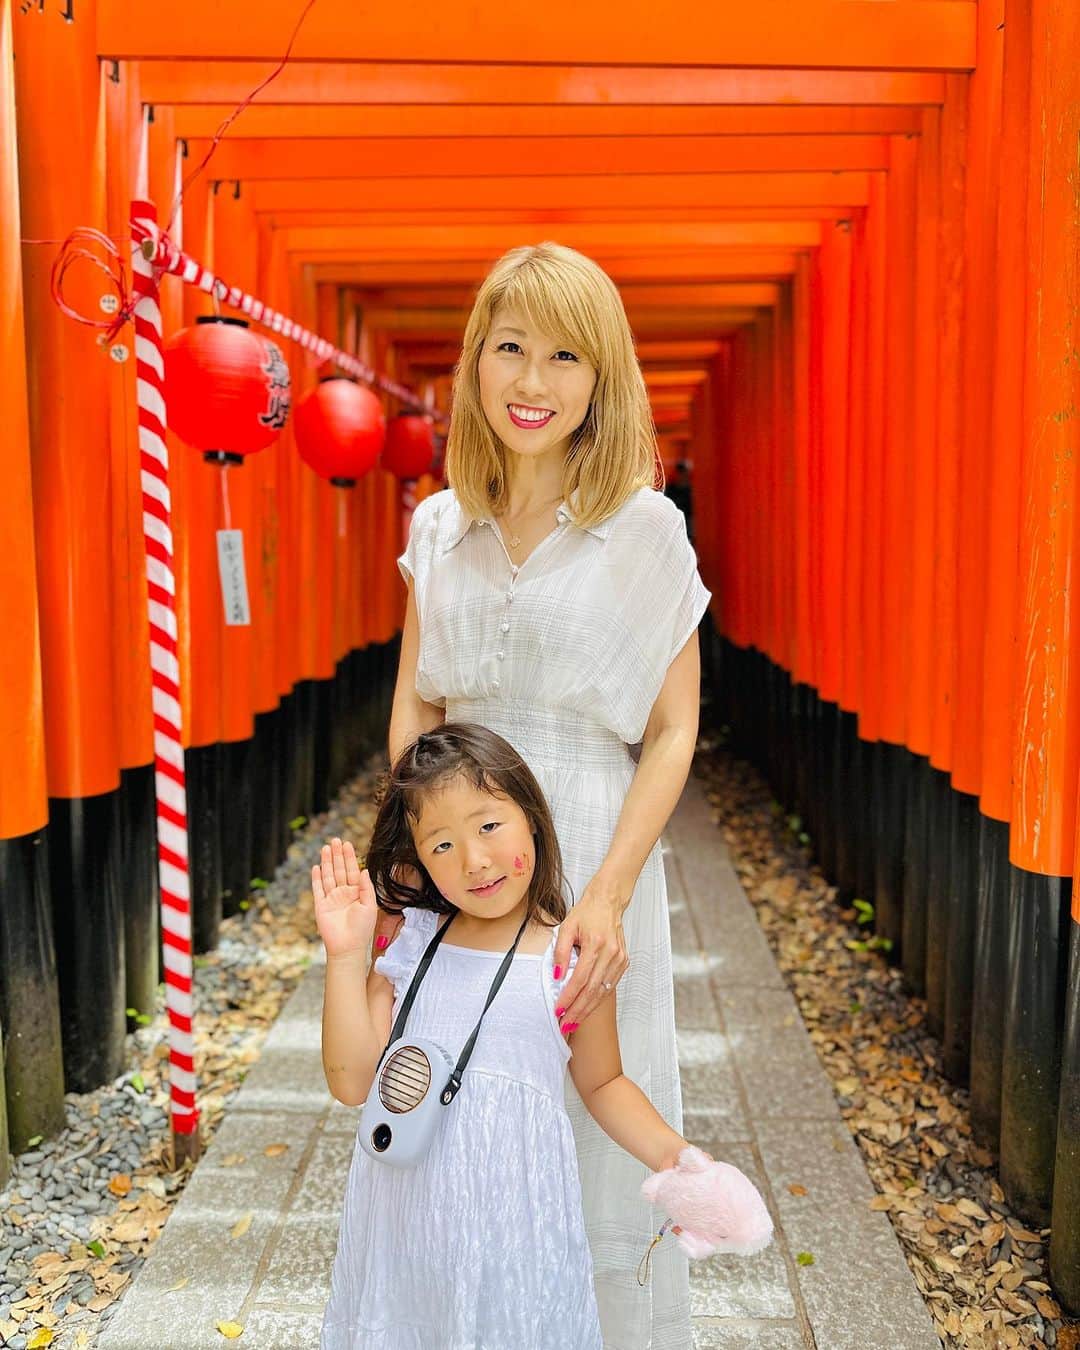 吉田ちかさんのインスタグラム写真 - (吉田ちかInstagram)「Had so much fun visiting Osaka & Kyoto last weekend!  We were busy with events and meetings so we were able to do too much sightseeing, but we did make it out to see the iconic Senbon Torii at Fushimi Inari Shrine.   I’ve always wanted to see this in person!   As with any iconic sightseeing spot though, it was much more crowded than you would think from all the photos, but it was still a sight to see! And OMG I couldn’t believe how many foreign visitors there were! So happy to see everyone coming out to Japan!!  先週末は関西を満喫させていただきました！  イベントや打ち合わせ、お友達に会ったりで忙しくてあまり観光はできませんでしたが、前から気になっていた伏見稲荷大社に行けて大満足！  有名な観光スポットあるある - 実際行くと観光客だらけでしたがw やっと実物を見れてよかった😆しかし、京都の外国人観光客の方の多さにびっくり！！こんなに沢山の方々が世界中から日本に遊びにきてくれていて嬉しいですね！！  他の写真の一言コメント↓ 大阪で @shinsaku_samurai さんに素敵なお店を紹介してもらった😆 @sumikappo.hirac  📸京都のKittyちゃんに興奮するプリン 📸イラストレーターの @amami_illust_kyoto さんと夜中の打ち合わせ 📸Ace Hotelの中庭が素敵だった✨ 📸京都水族館が最高によかった👍 📸鉄道博物館もめっちゃオススメ🚃  📸クローバーも色々とわかるようになってきて、旅を楽しみ始めている様子 (より大変になったけどw）  Posted from Cebu🇵🇭 フィリピンの様子もシェアしますね！」7月23日 18時27分 - bilingirl_chika